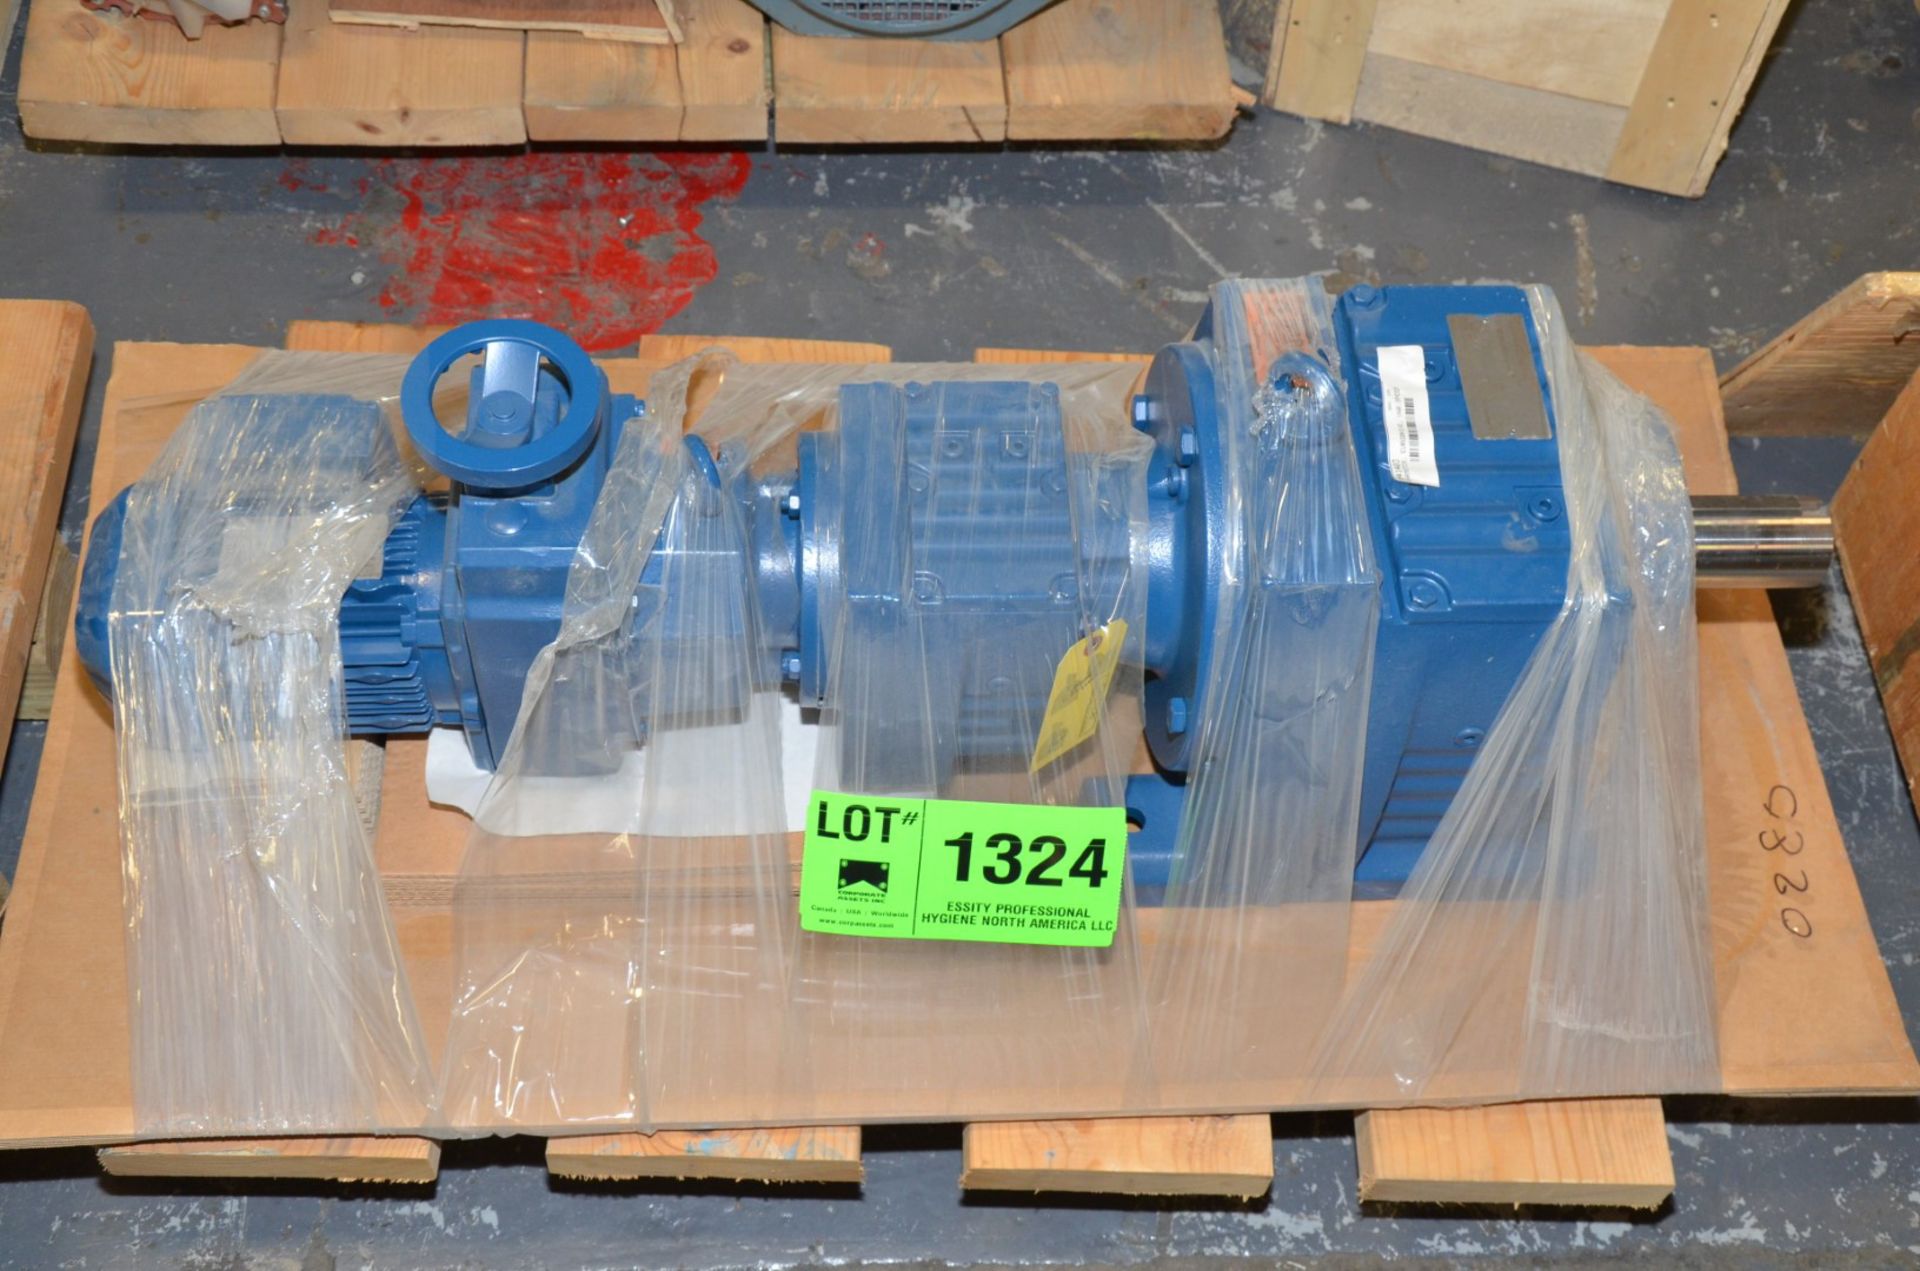 SEW BB41403 ELECTRIC GEARMOTOR [RIGGING FEE FOR LOT #1324 - $25 USD PLUS APPLICABLE TAXES]